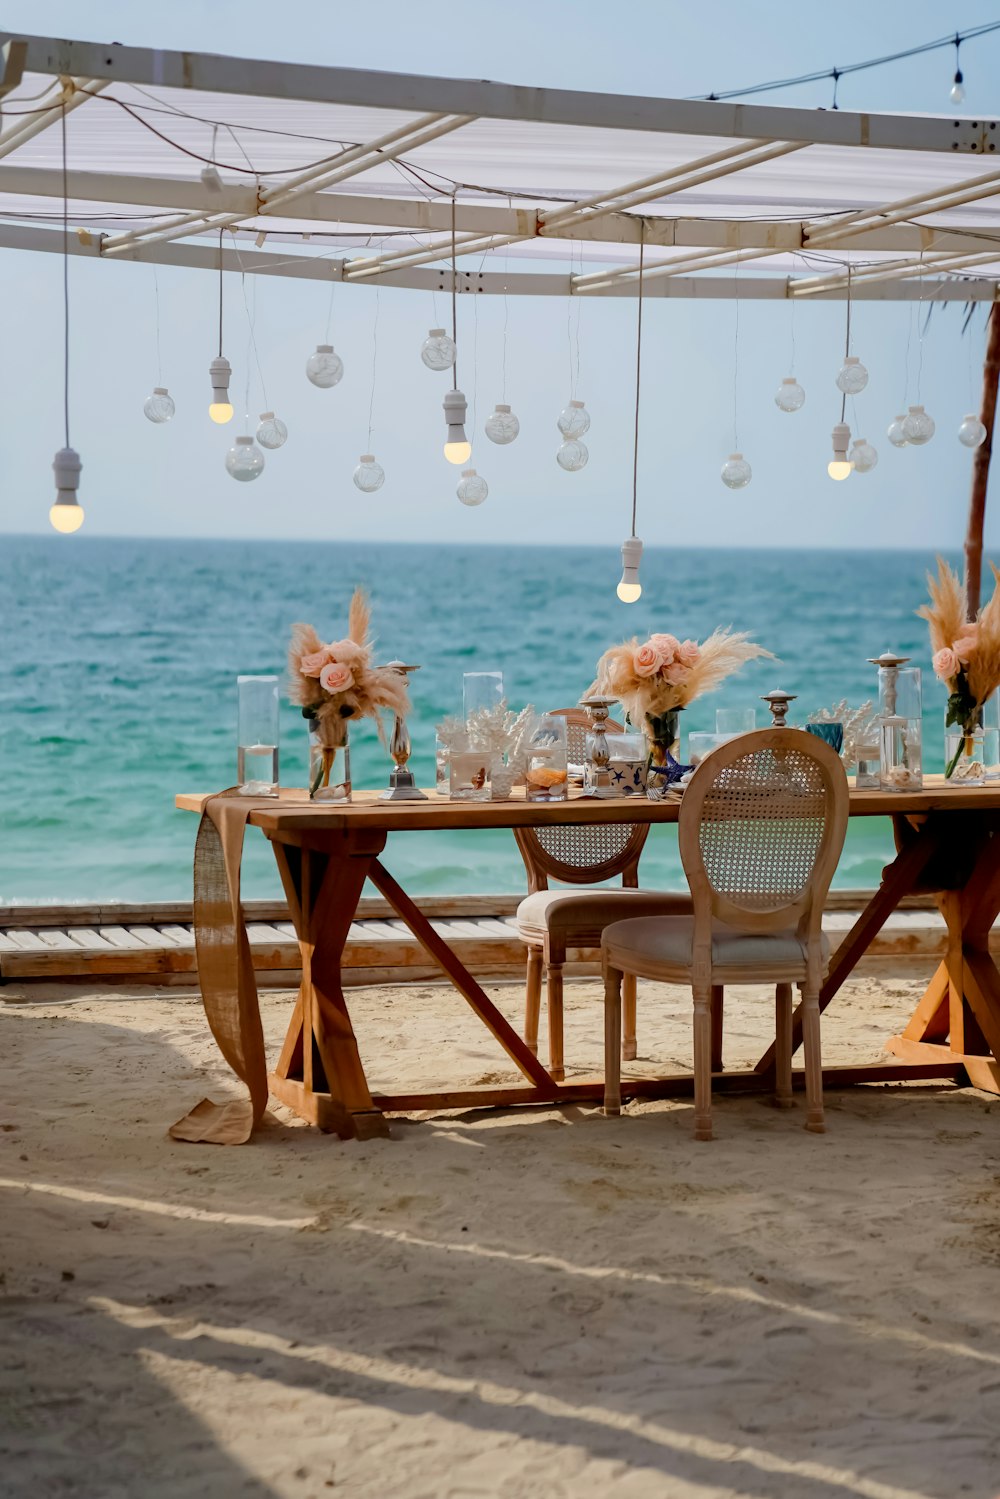 brown wooden table with chairs on beach during daytime